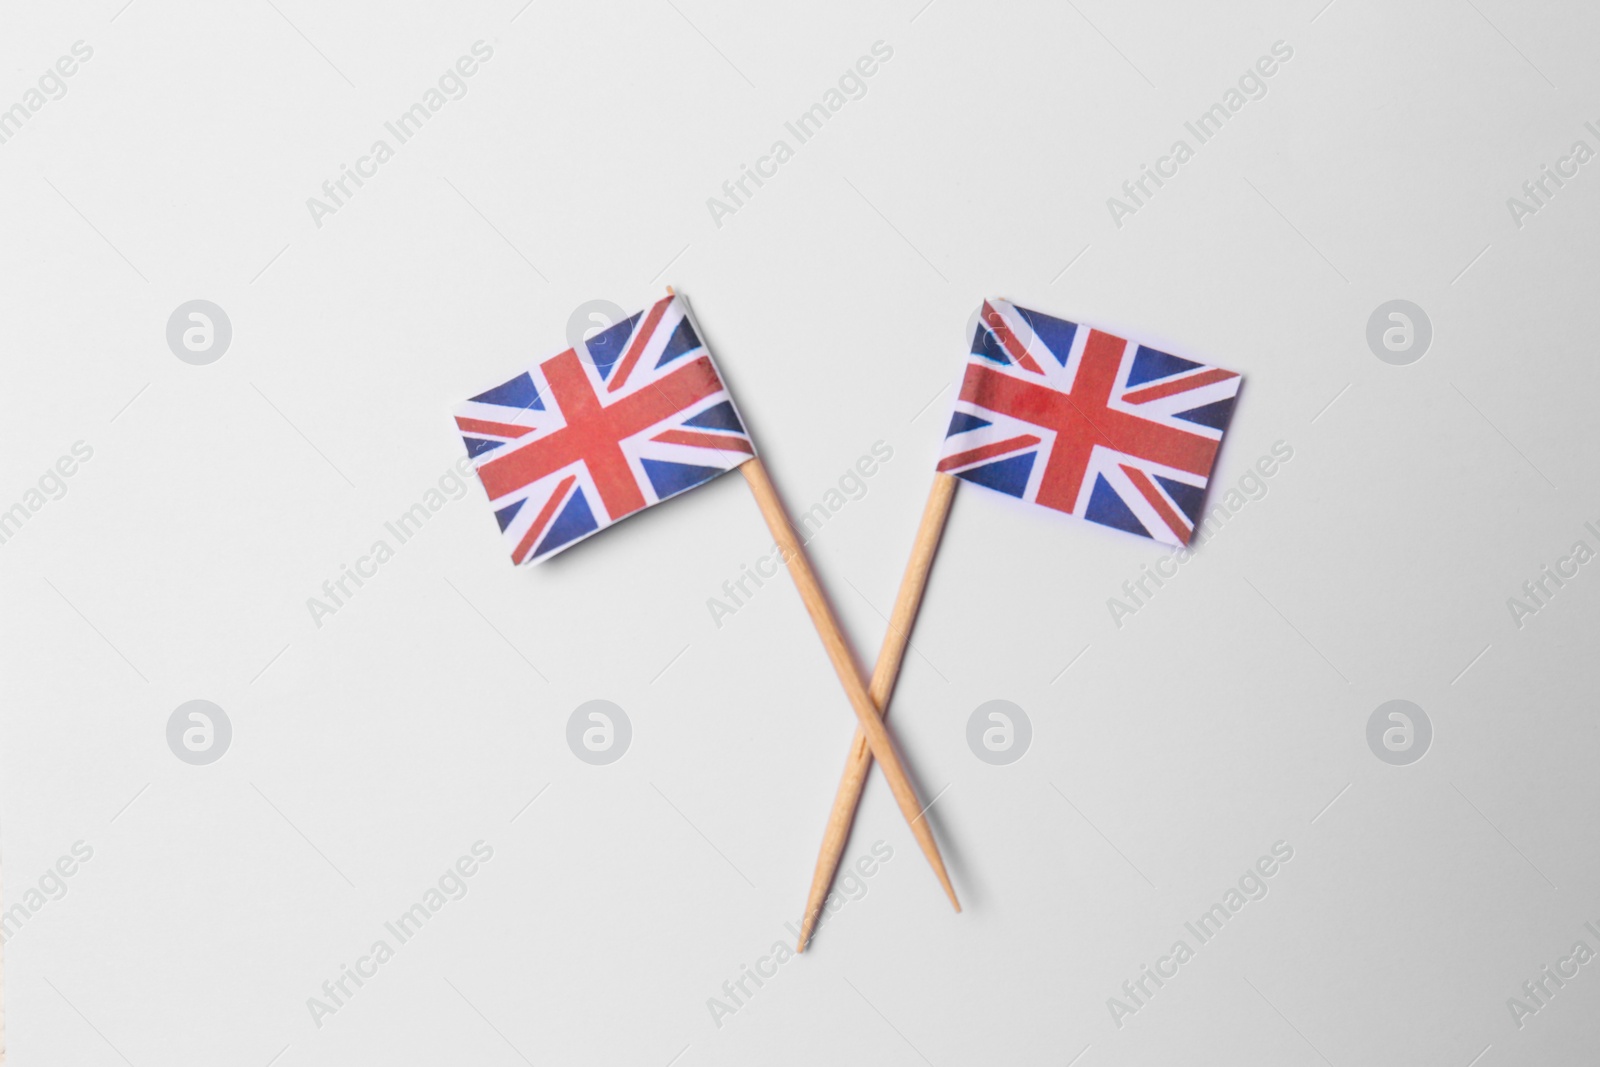 Photo of Small paper flags of United Kingdom on light background, flat lay